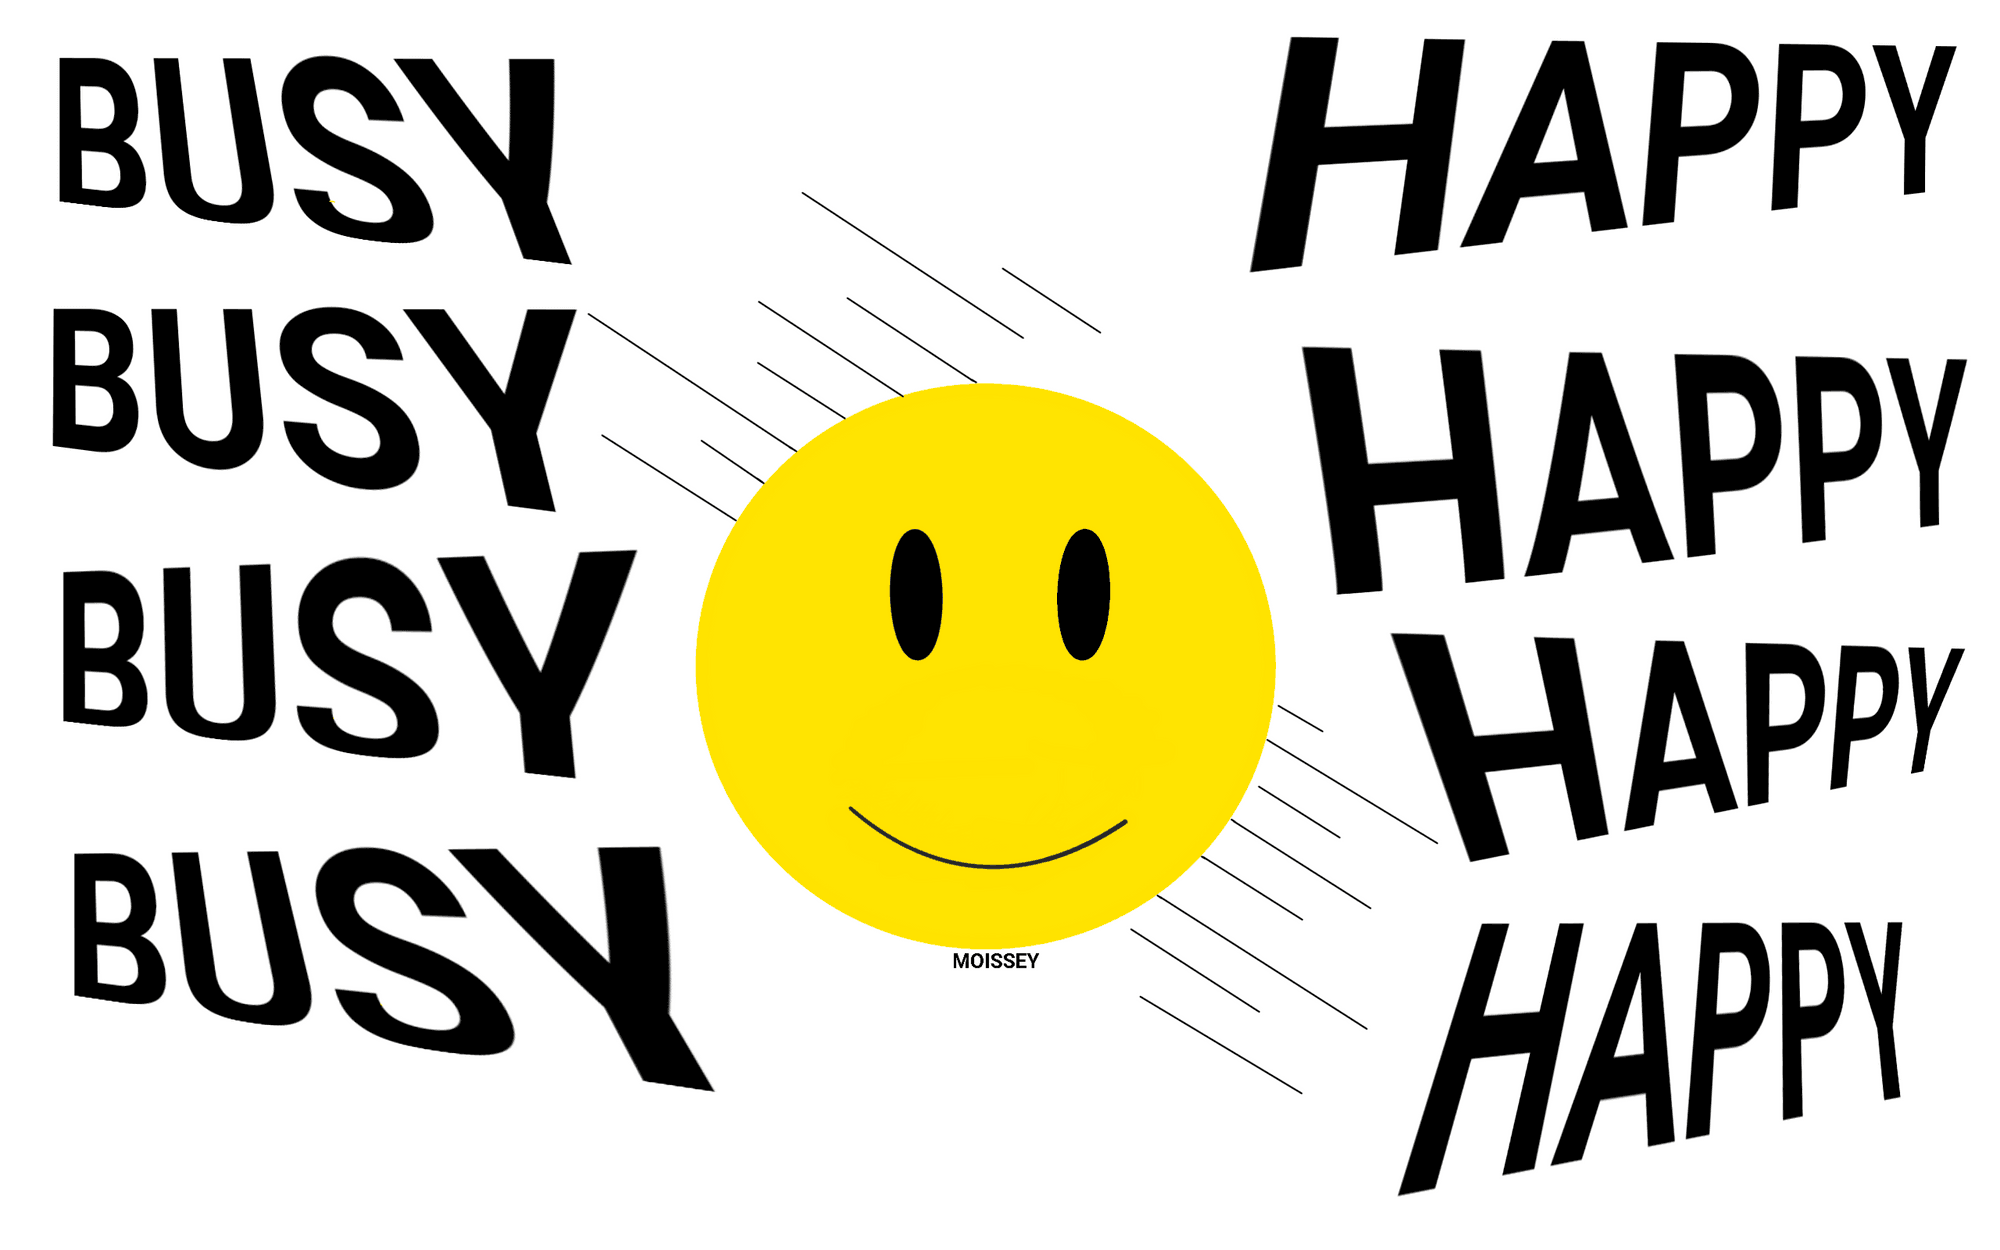 busy smiley face